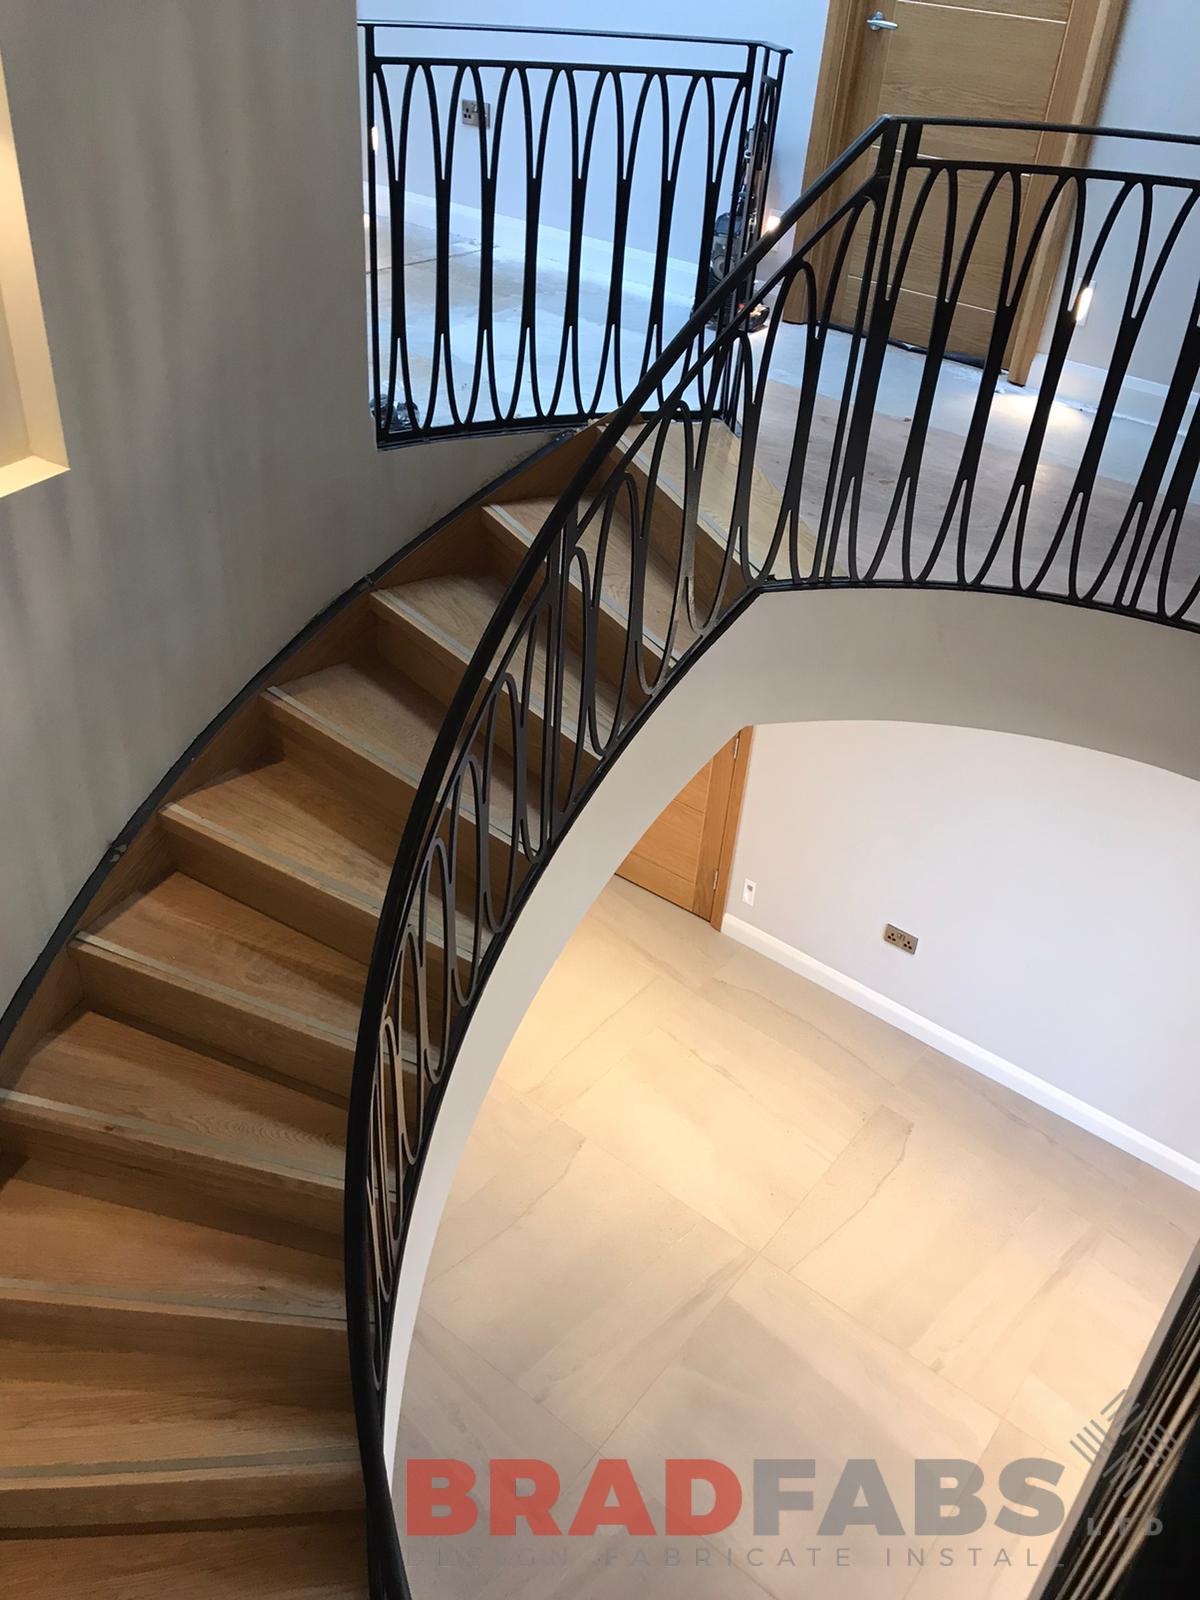 helix staircase with laser cut feature balustrade in mild steel and powder coated, with matching landing balustrade by Bradfabs